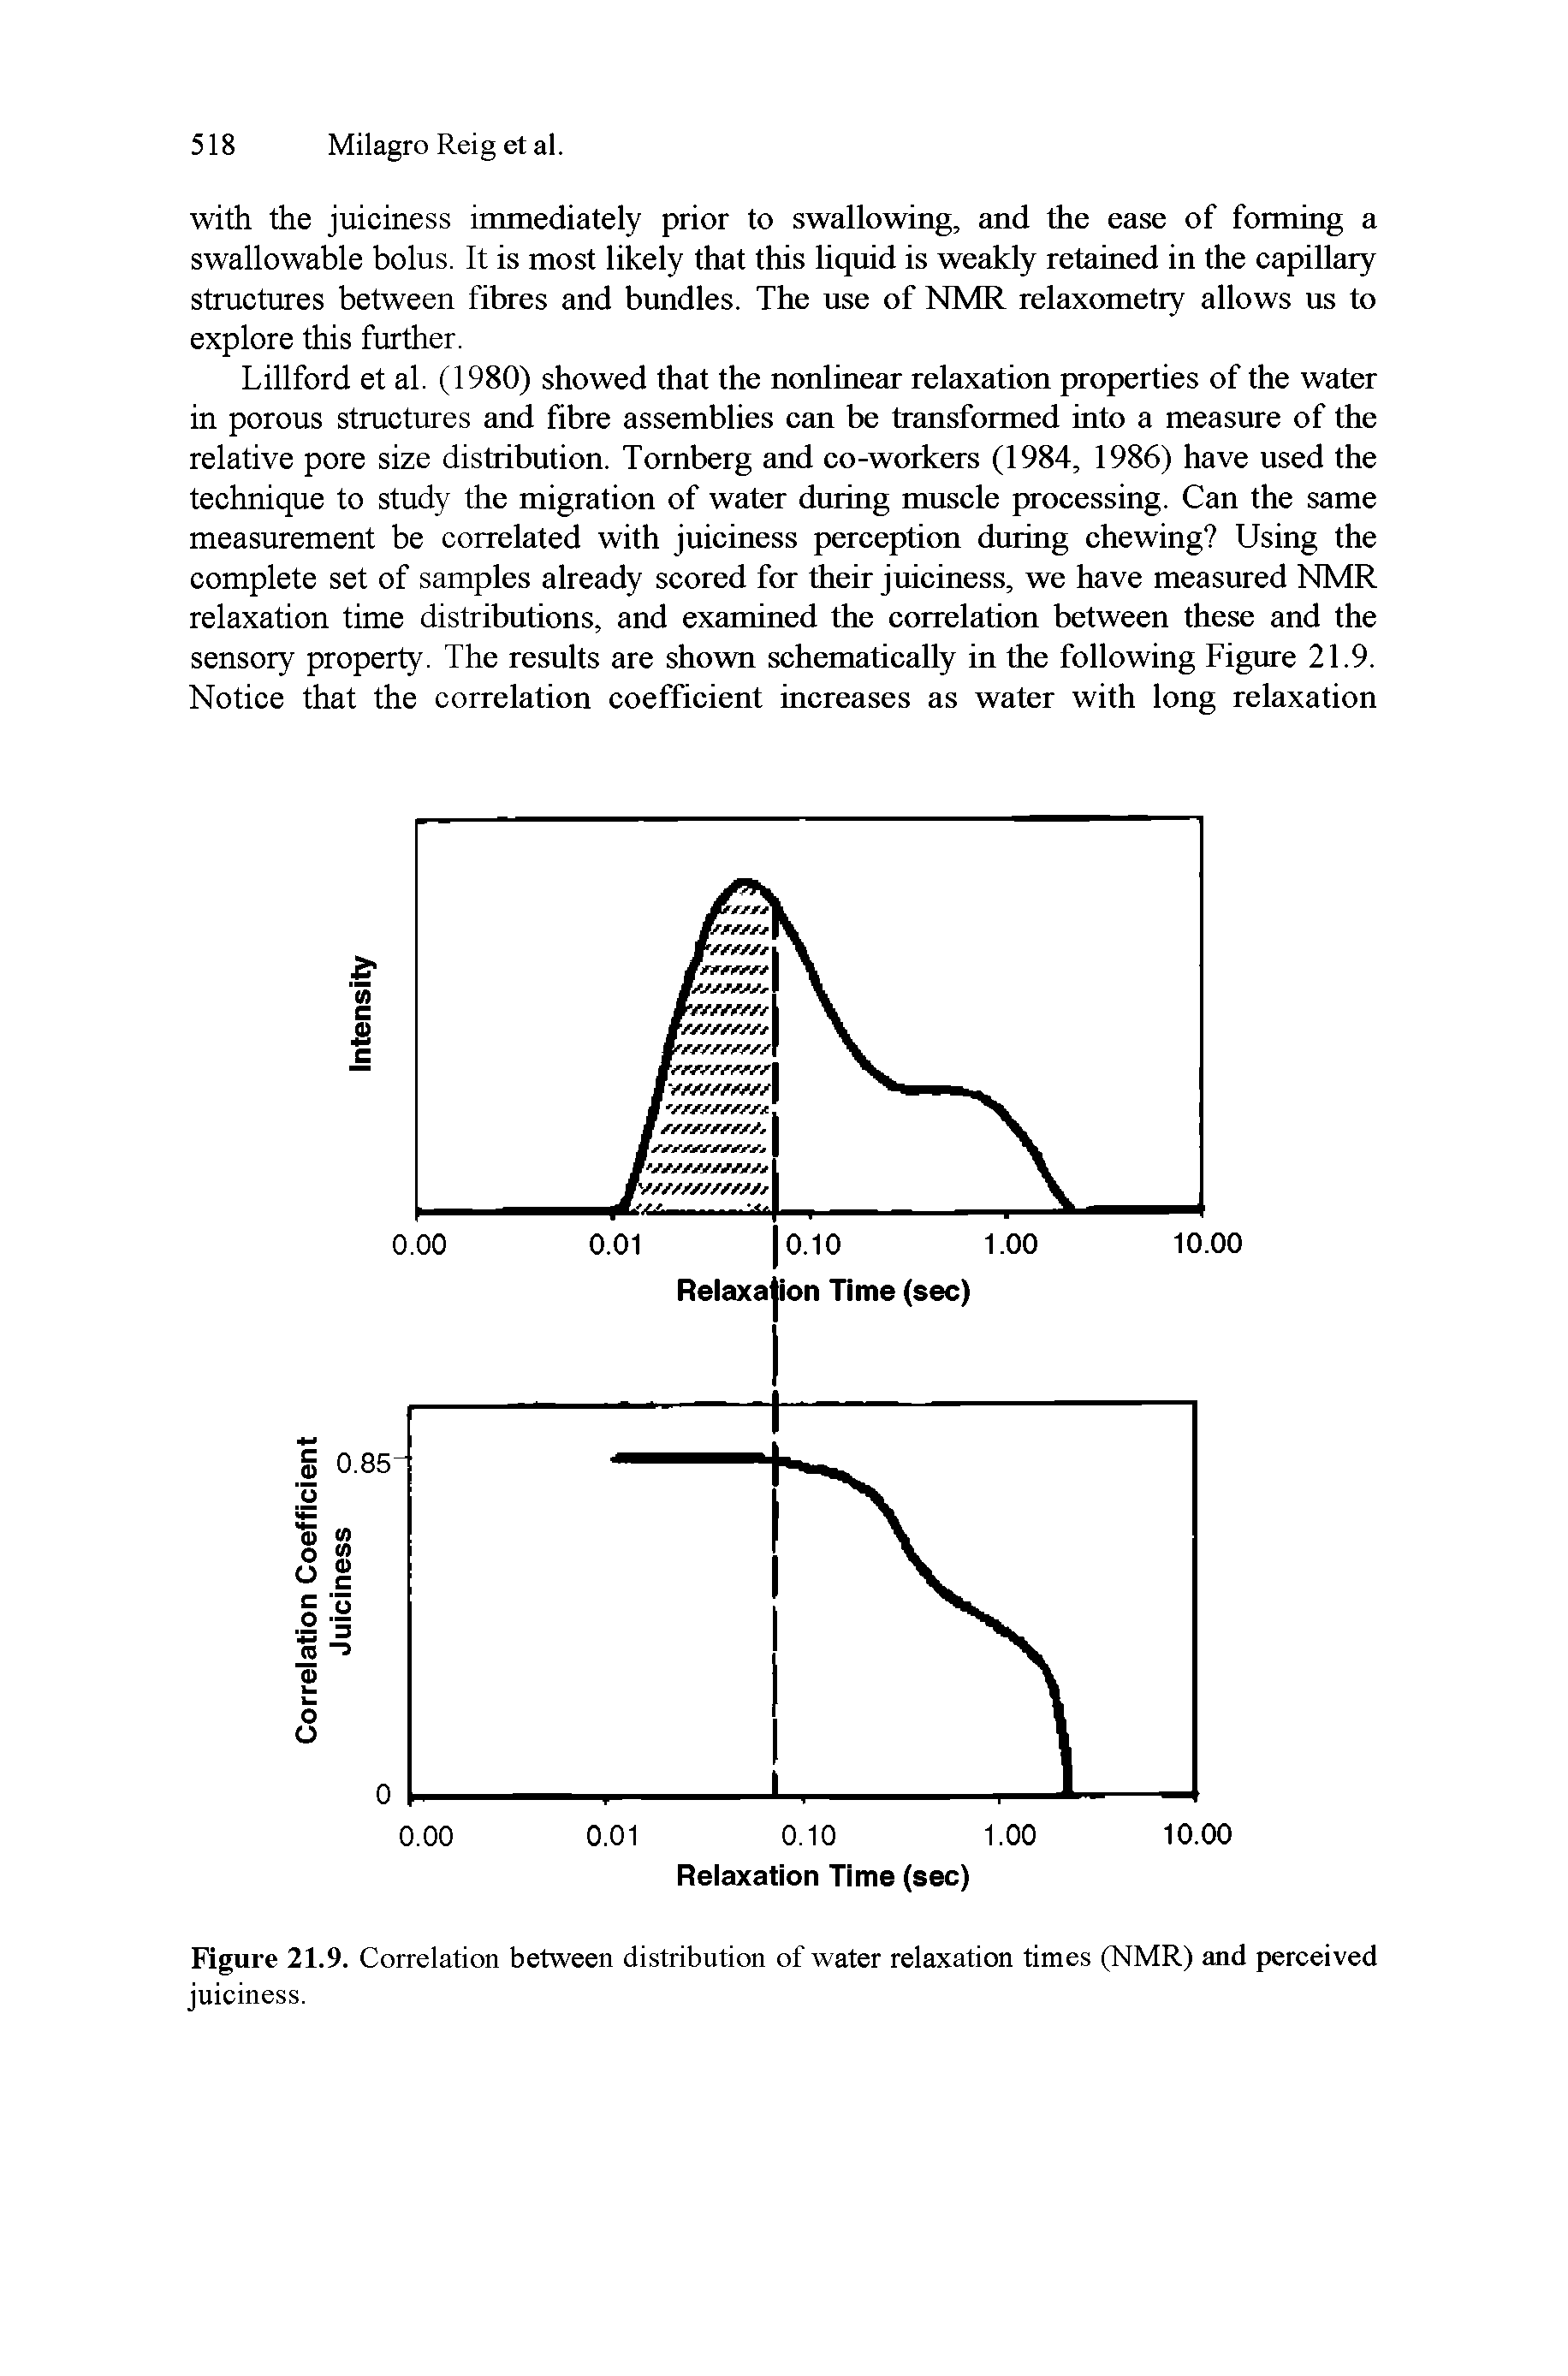 Figure 21.9. Correlation between distribution of water relaxation times (NMR) and perceived juiciness.